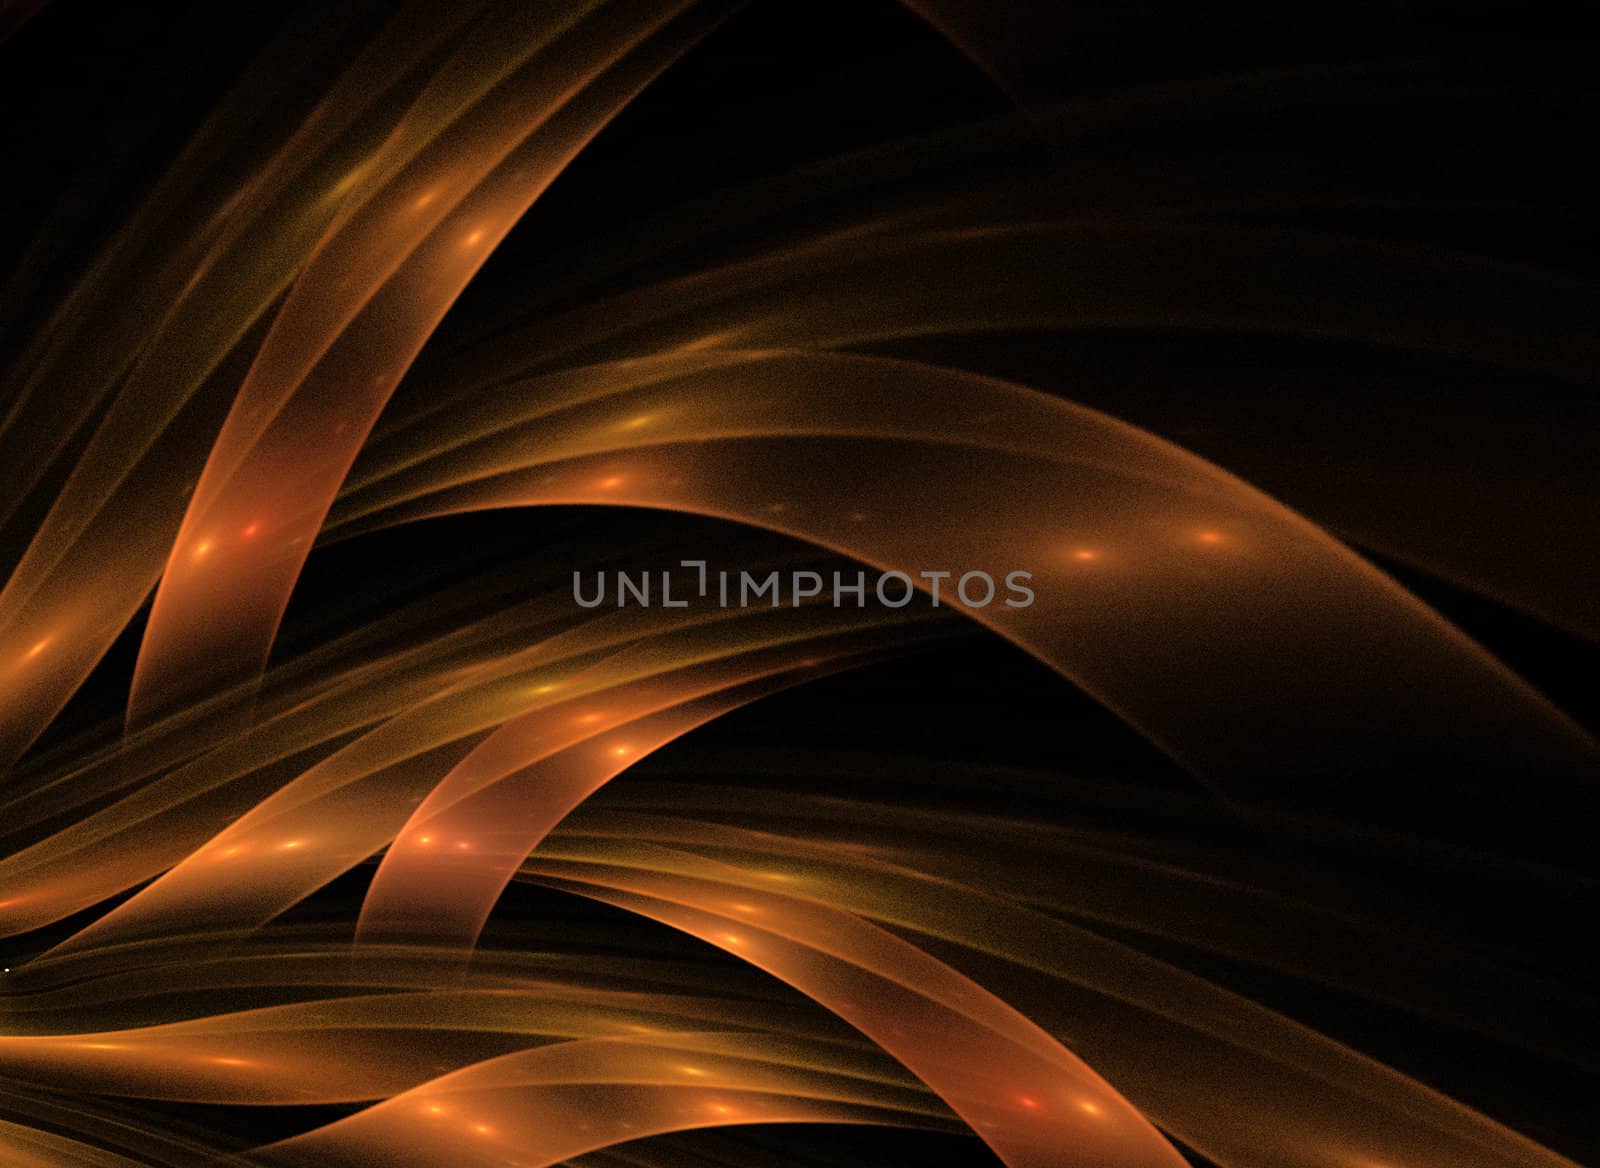 Black background with colorful shapes and abstract forms. by FernandoCortes